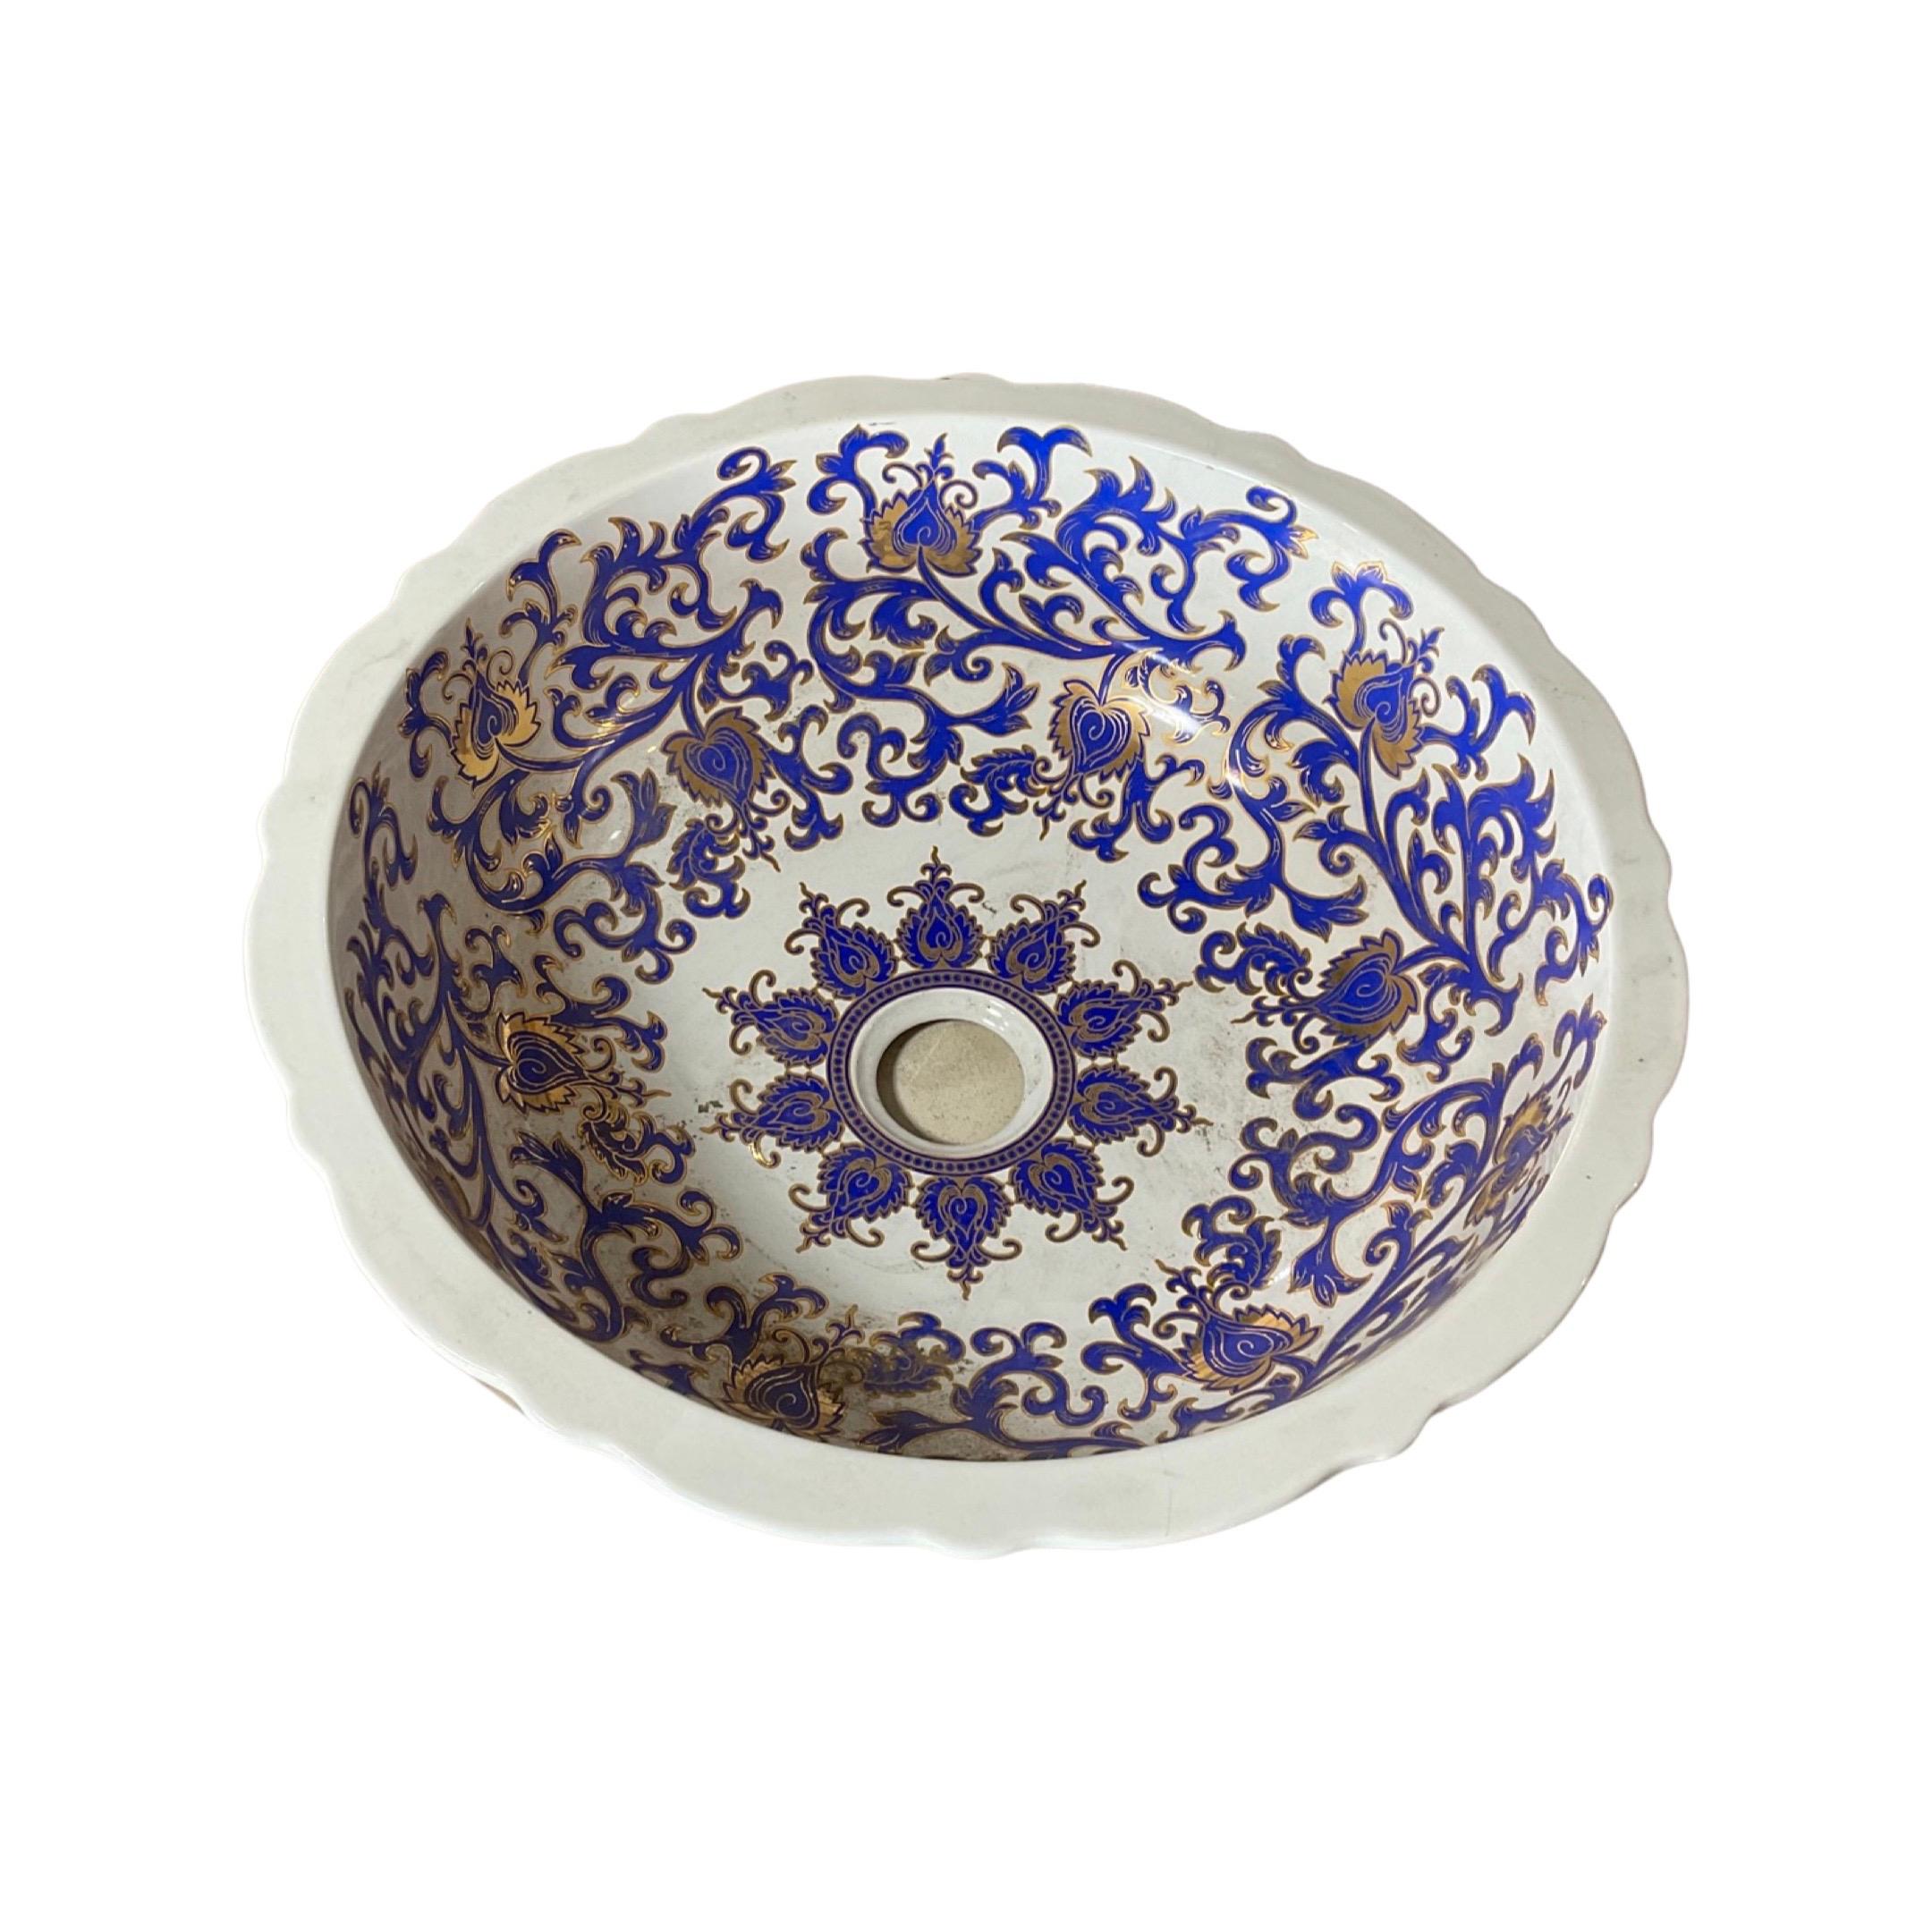 This handcrafted porcelain French sink bowl features a delicate floral design and a modern, contemporary look. The durable and high-quality porcelain bowl is designed to last and enhance any bathroom.